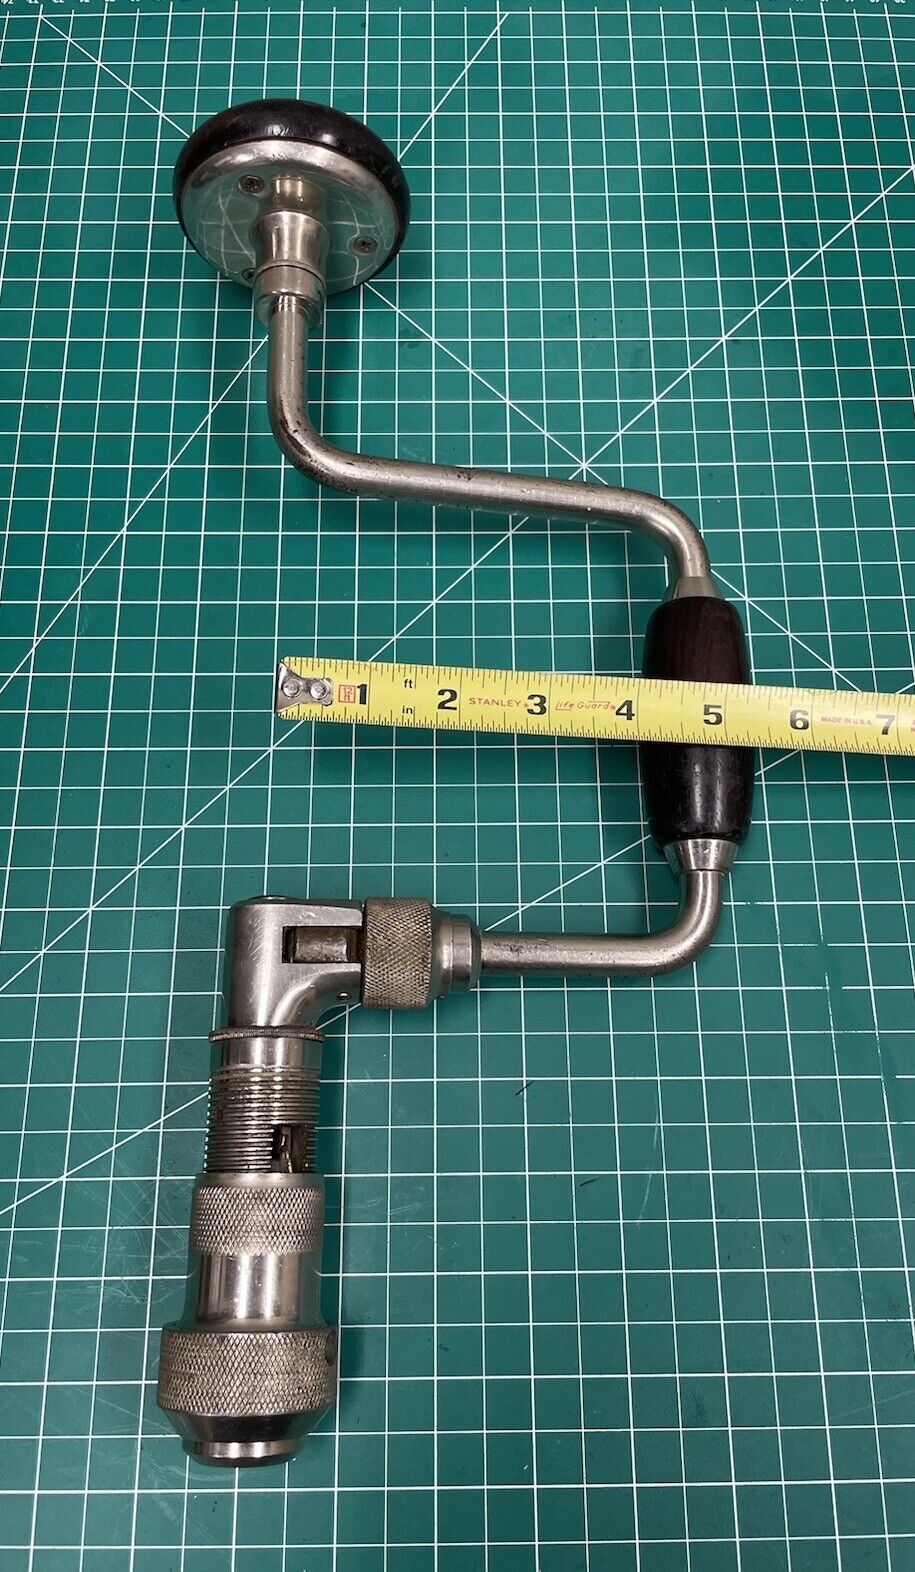 Vintage 10” PEXTO MB1-10 Ratcheting Bit Brace Auger Hand Drill Made in USA